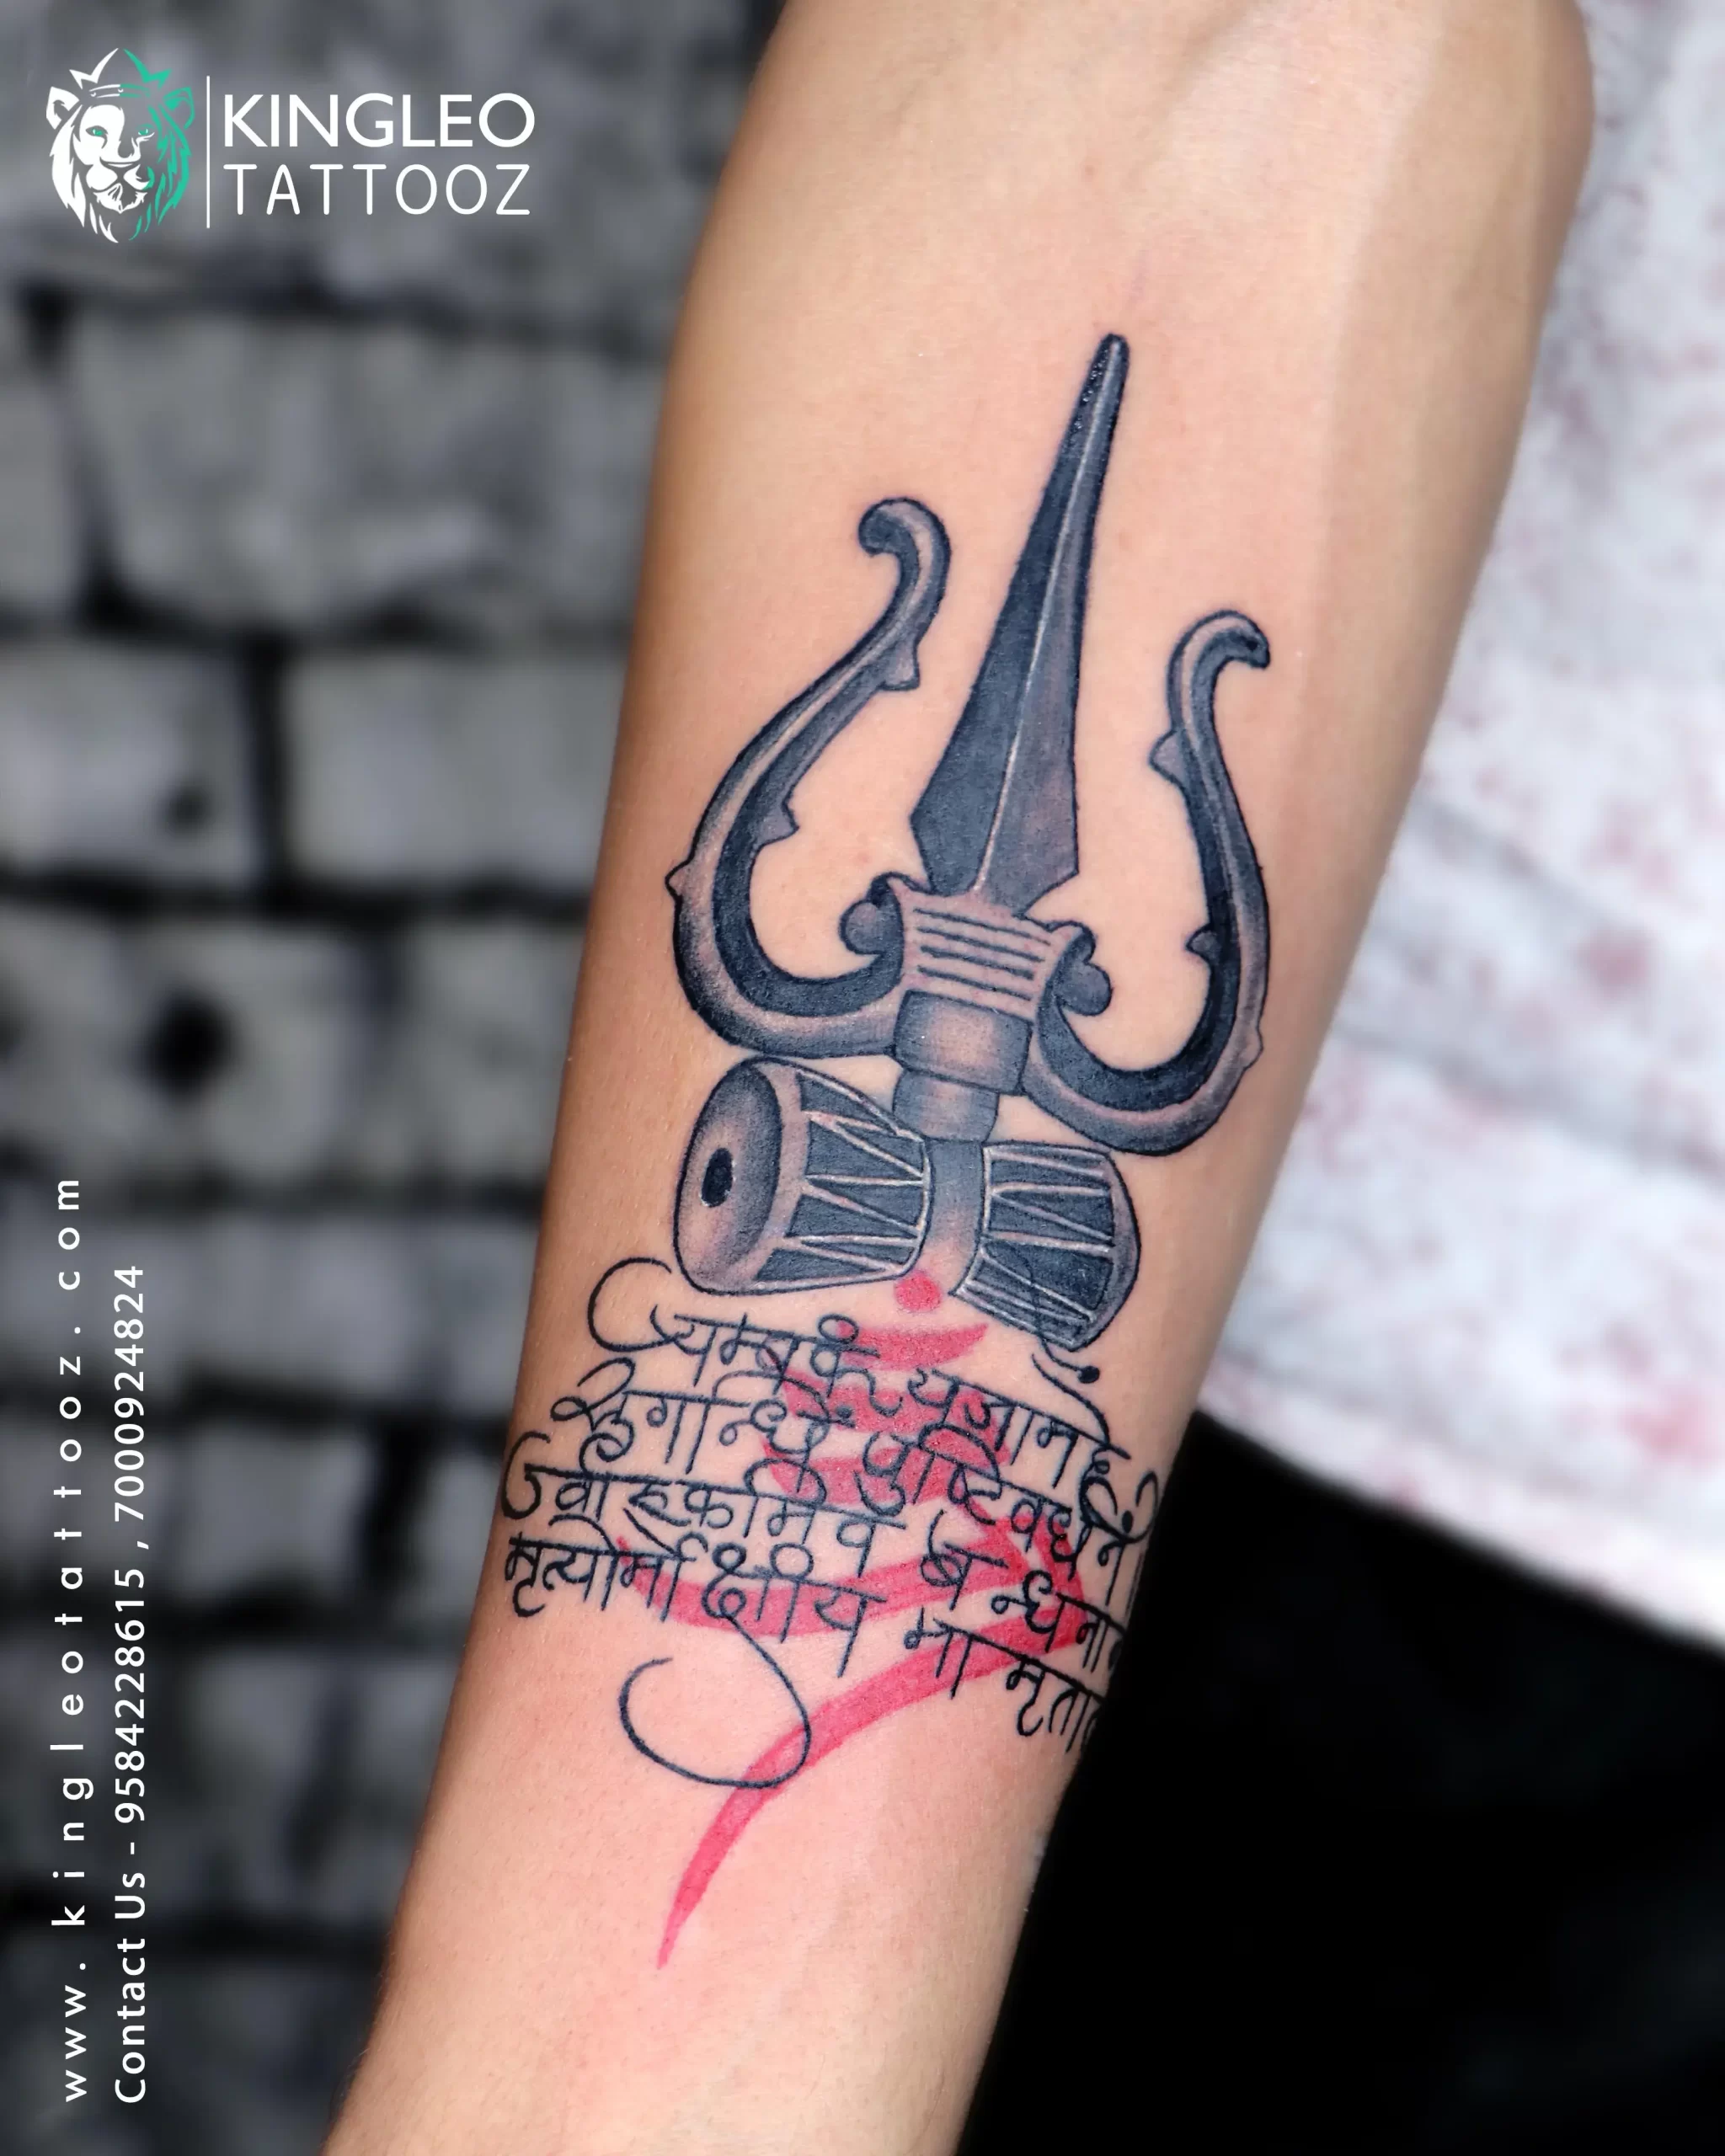 Customised this beautiful Lord Shiva armband with his elements Kedarnath  temple, Kailash parvat , Nandi and universe. Tattoo by @aakashch... |  Instagram